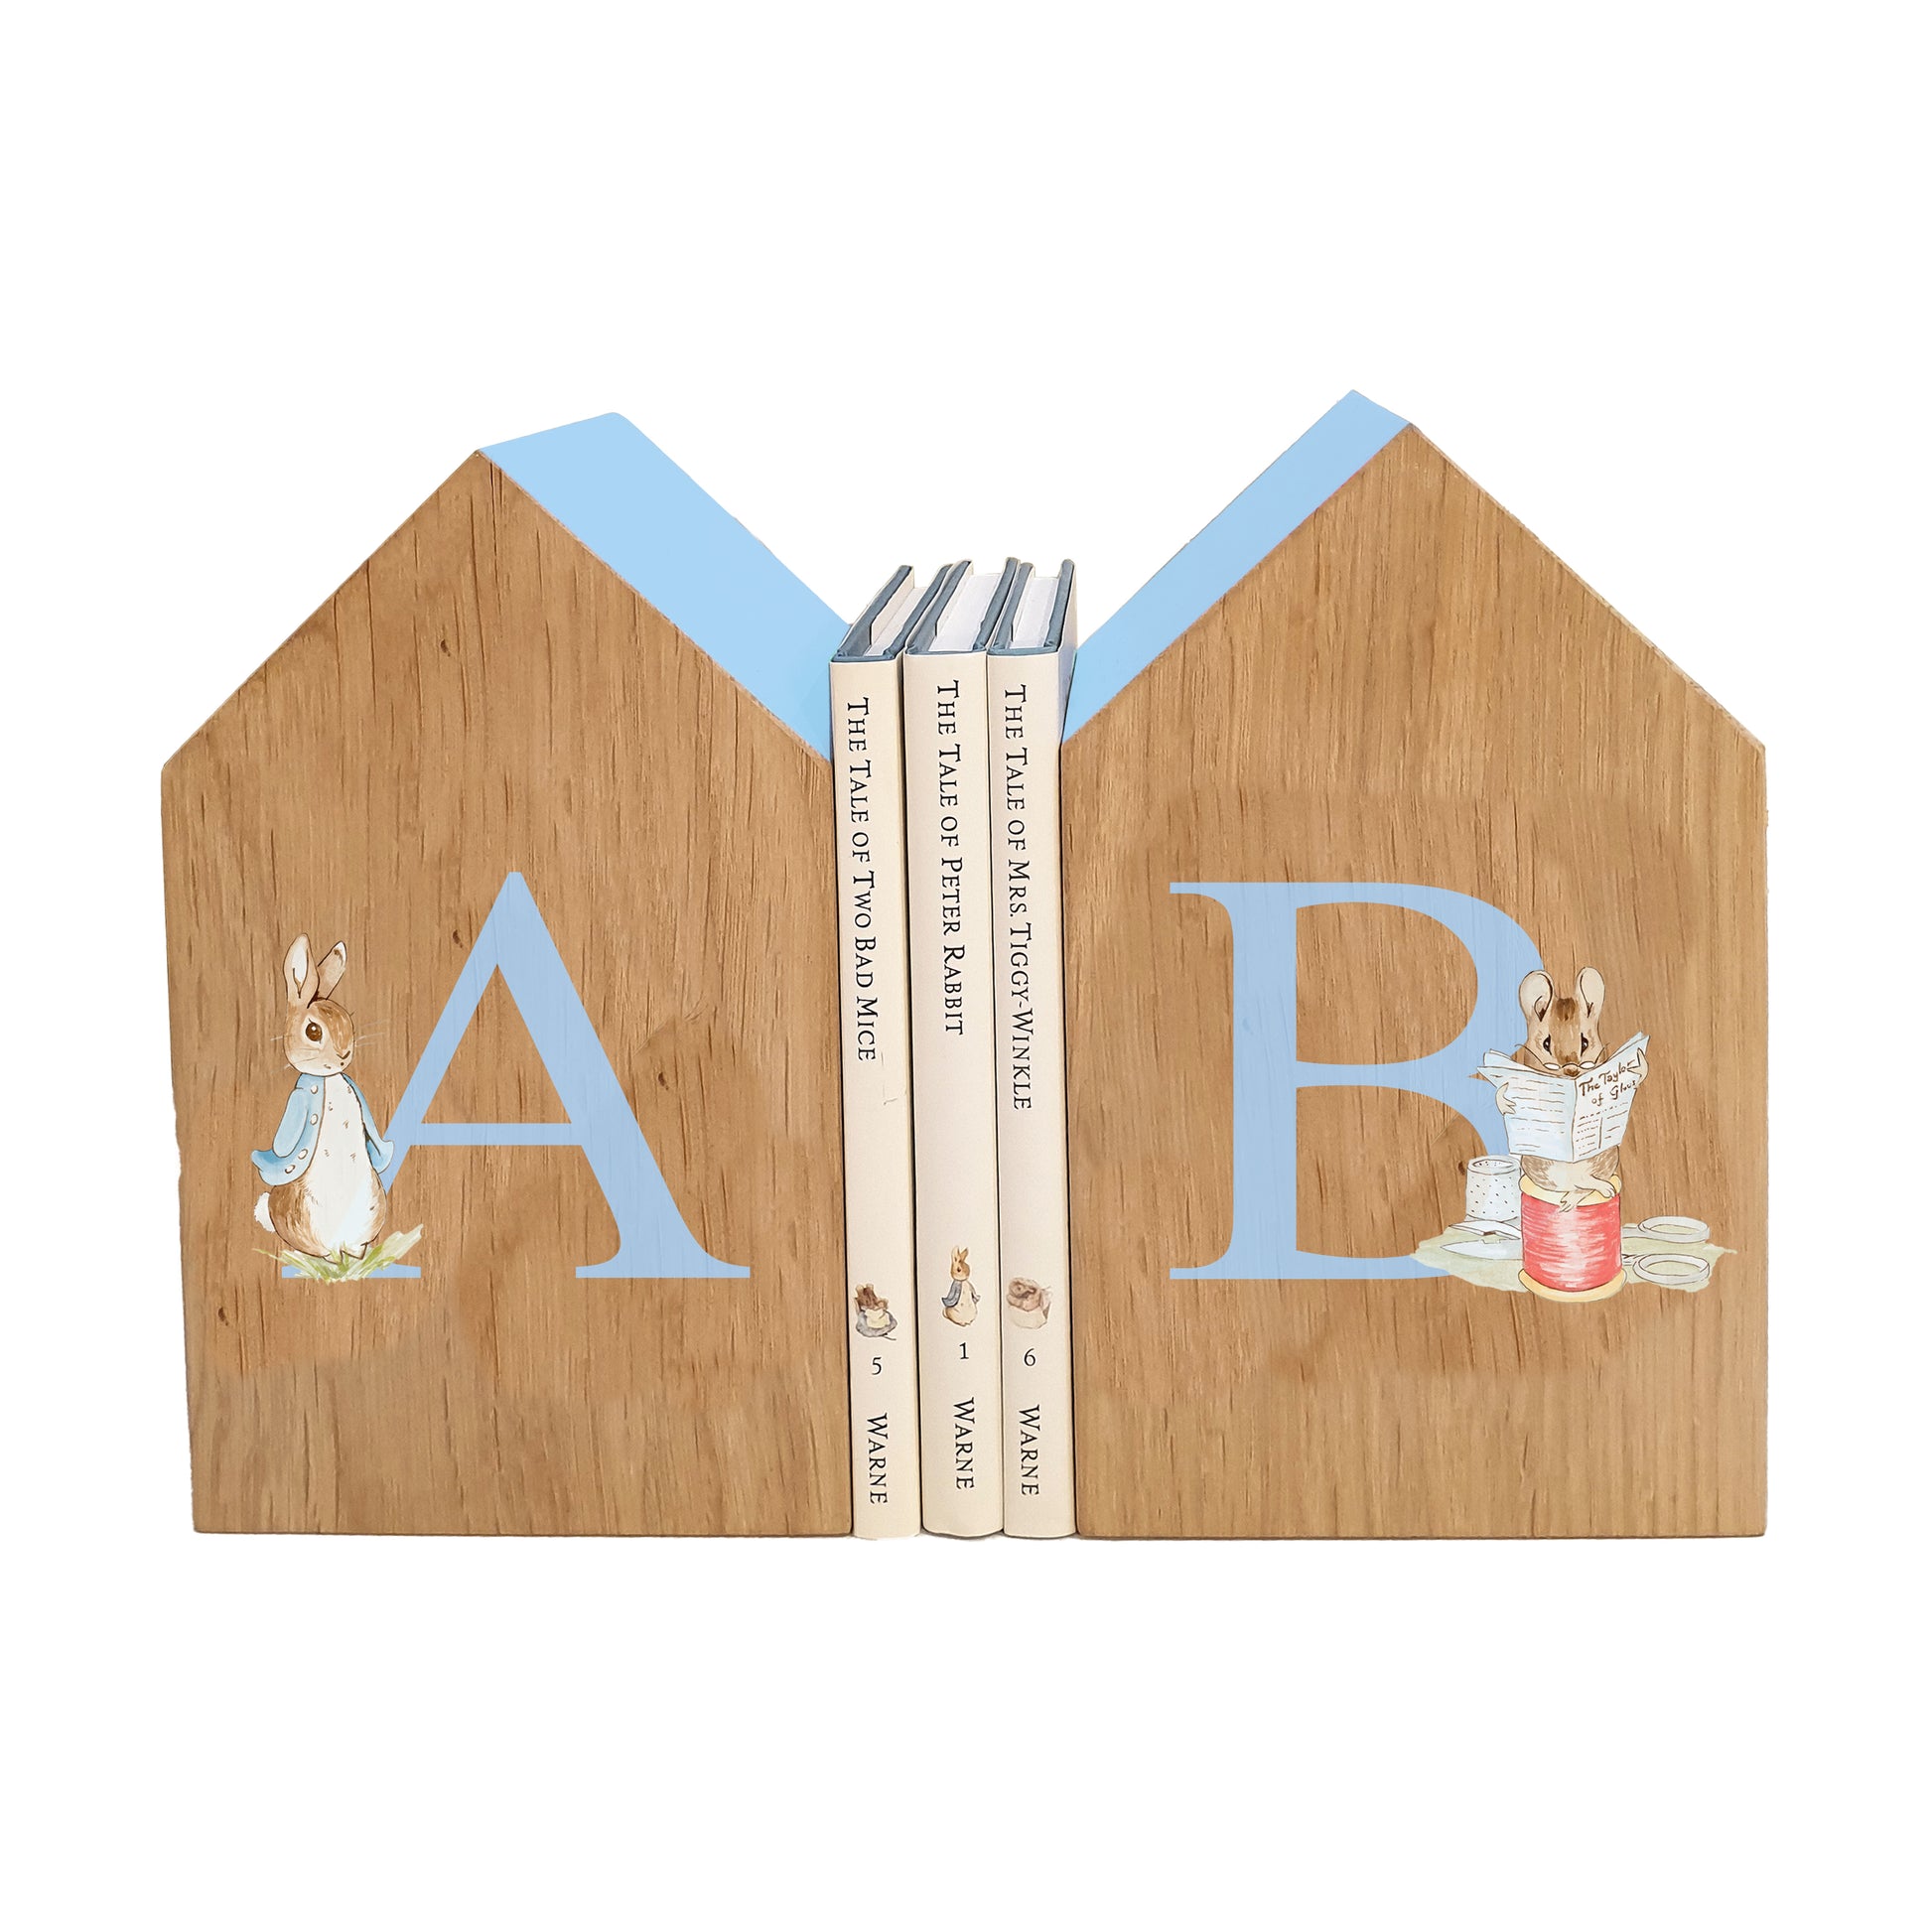 Personalised Oakhouse Bookends - Beatrix Potter with Dragons Blue Trim